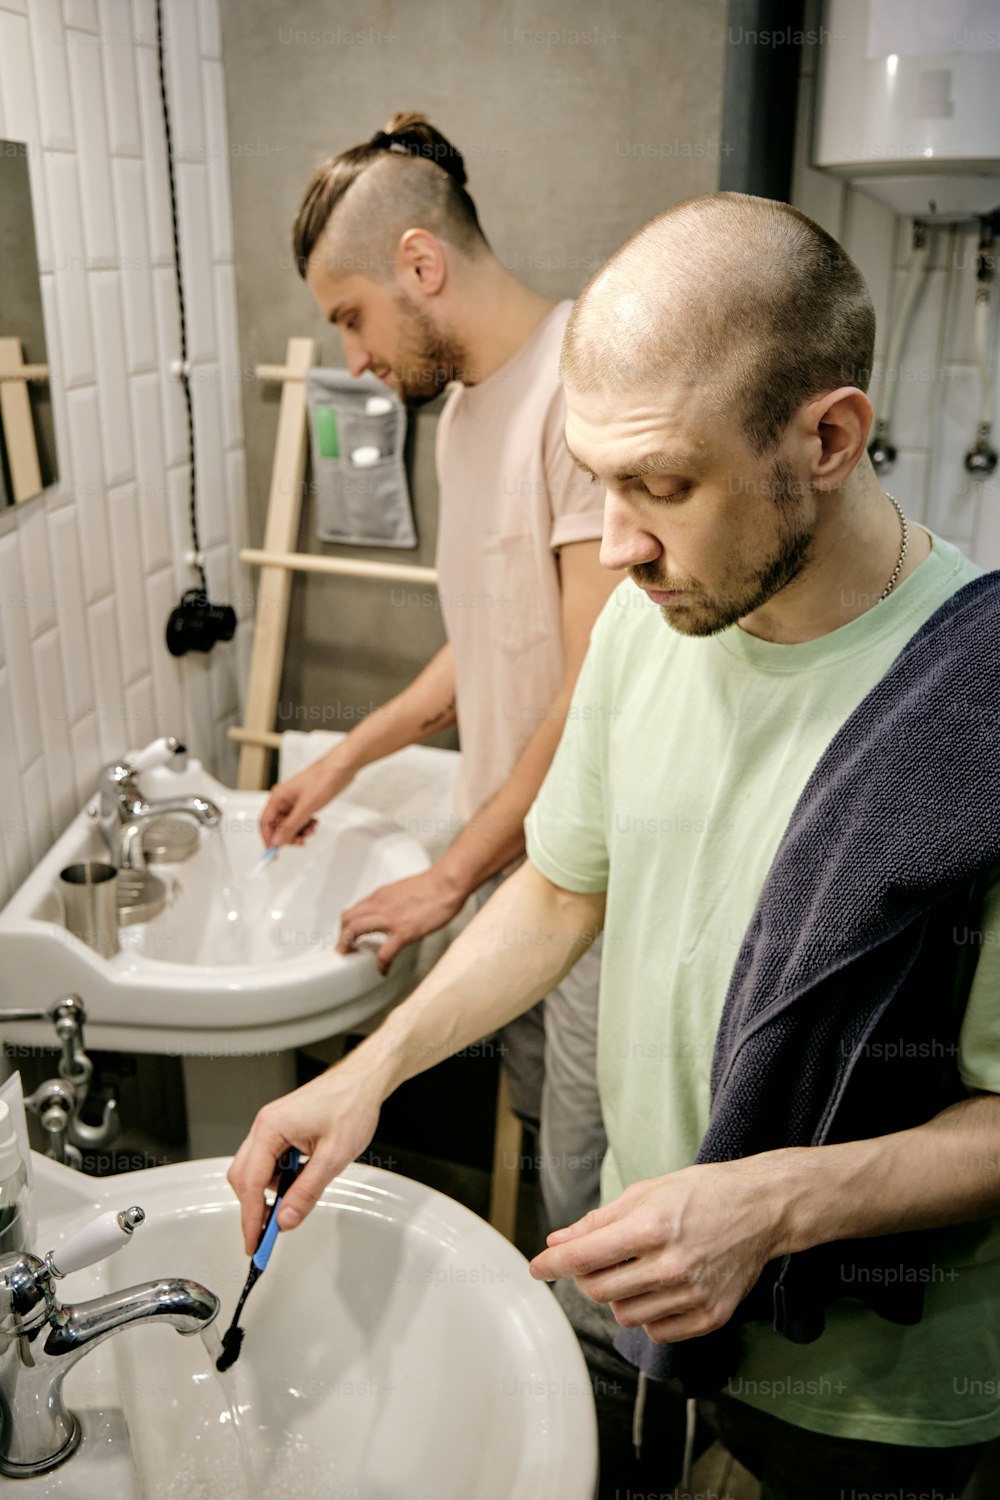 two young gay men washing toothbrushes after brushing teeth